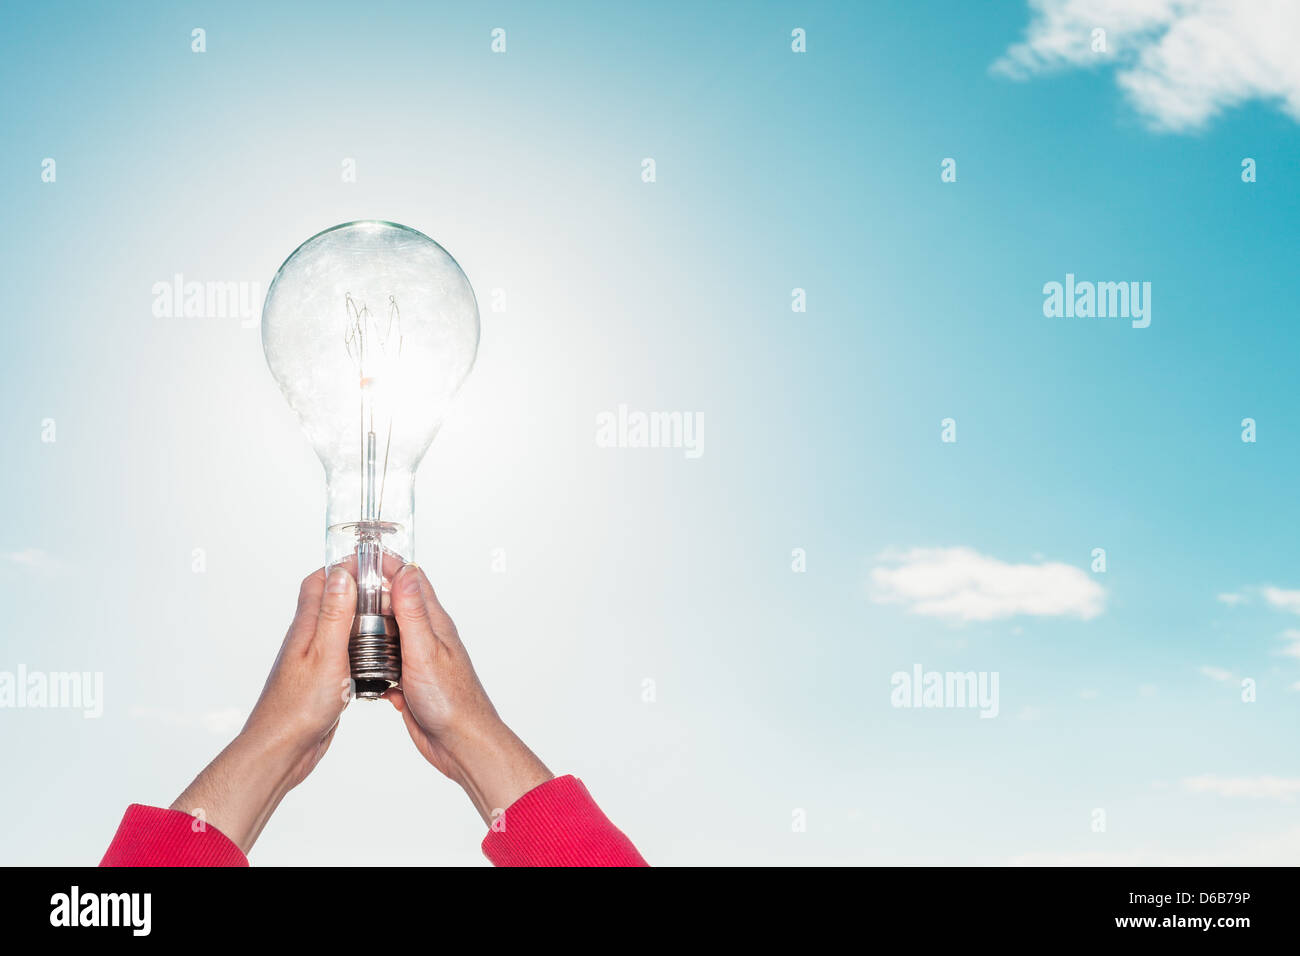 Woman holding light bulb in sky Stock Photo